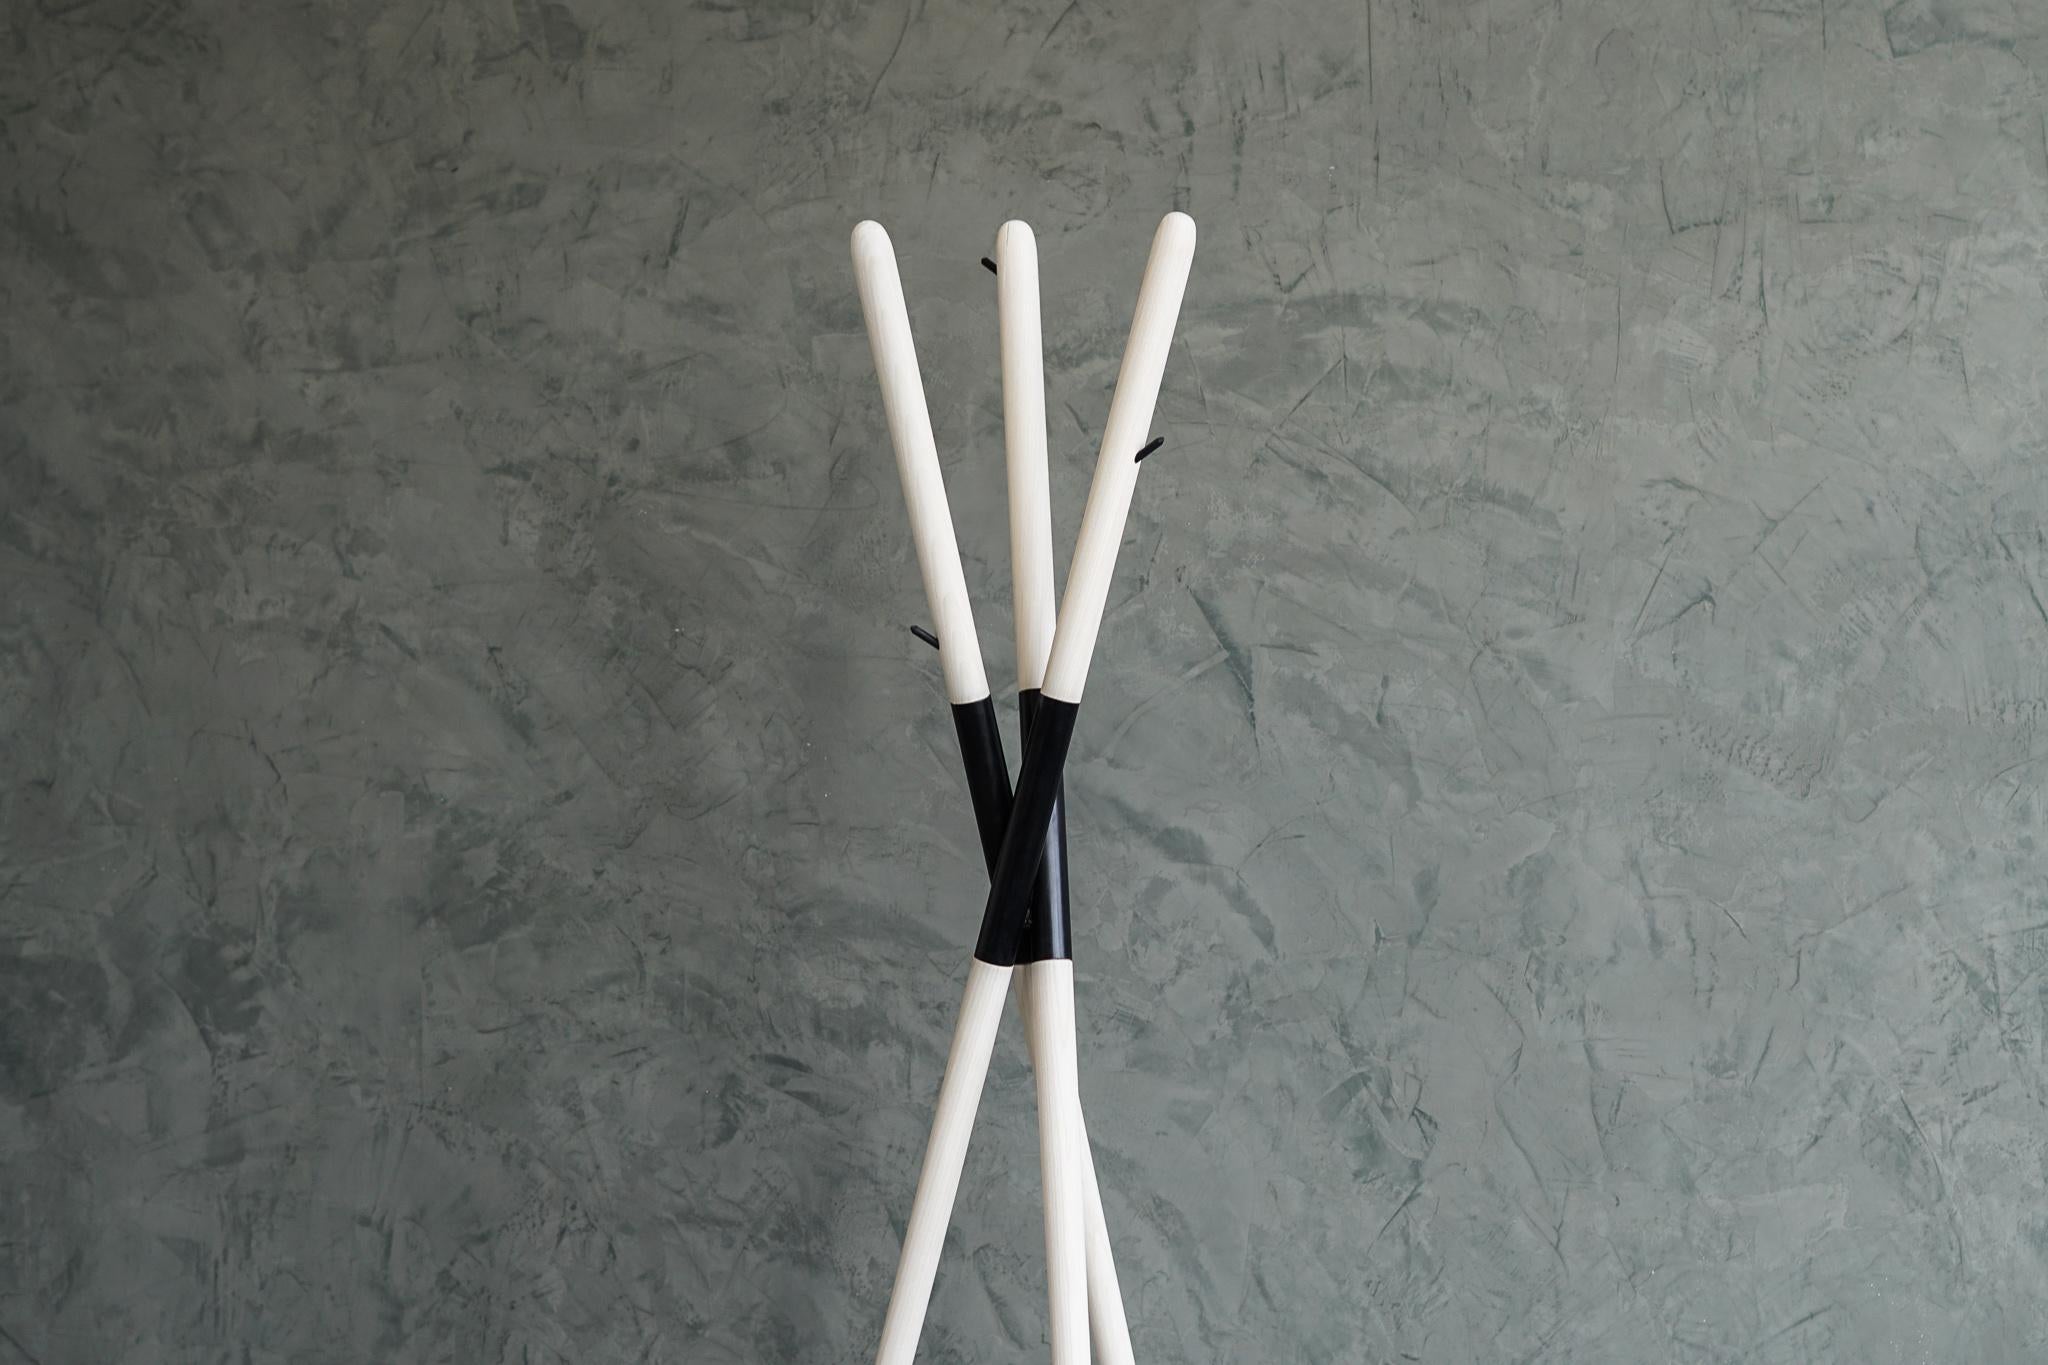 The Hashi coat rack is designed after a widely known tool, the chopsticks. Created from bleached ash and blackened steel. The Hashi mimics the simplicity and timelessness of this ancient tool used daily by millions around the globe.